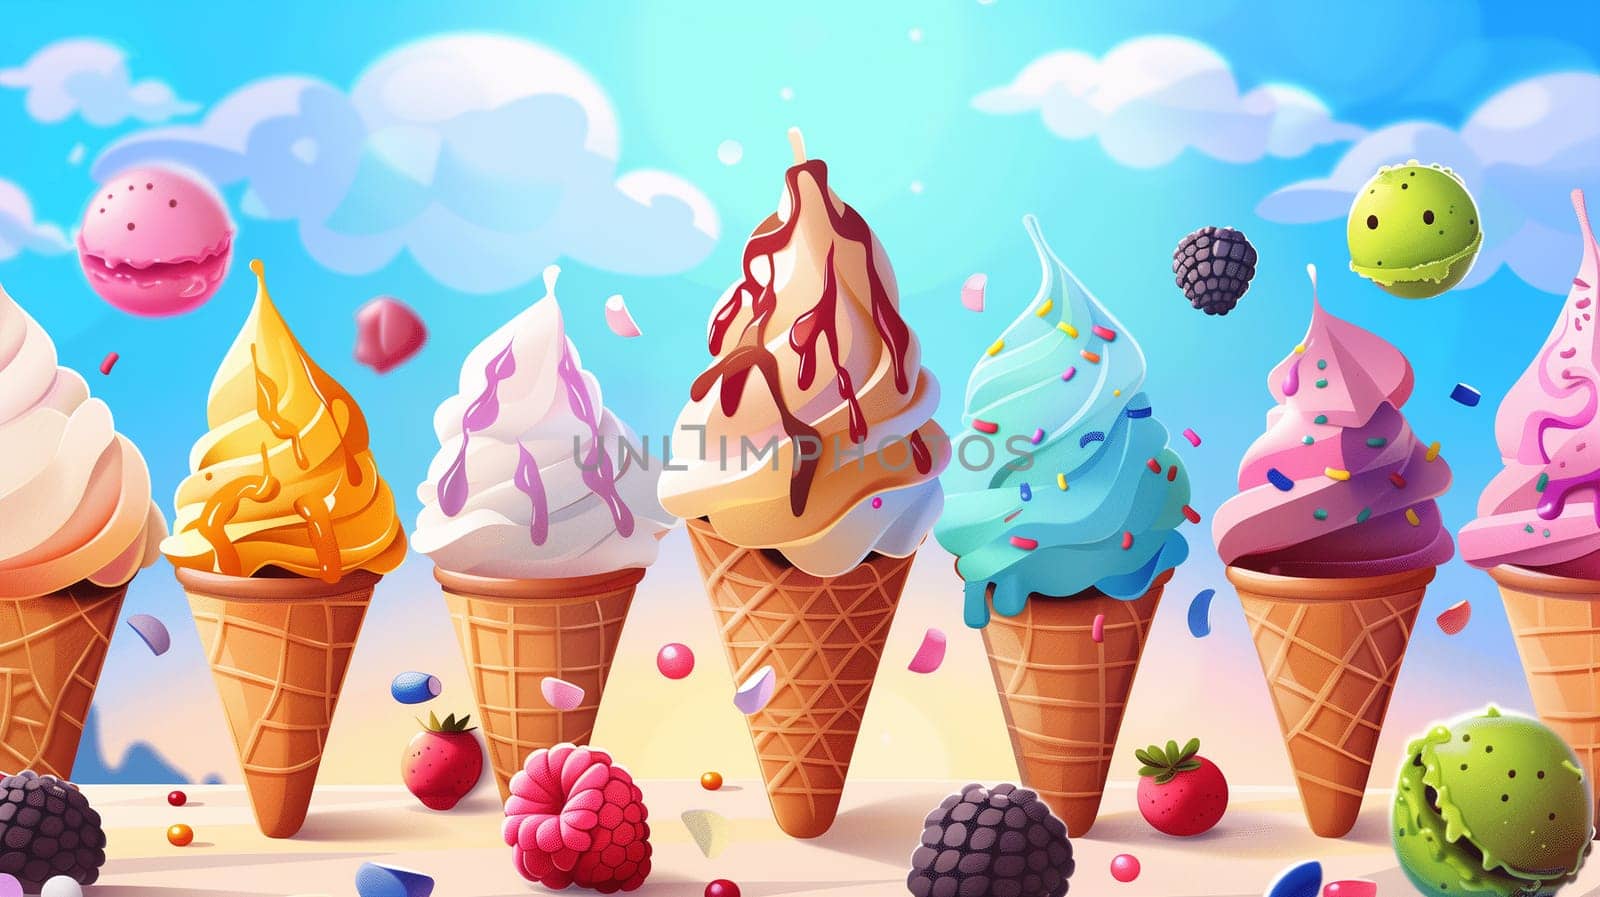 Assorted Ice Cream Cones in a Row by Sd28DimoN_1976